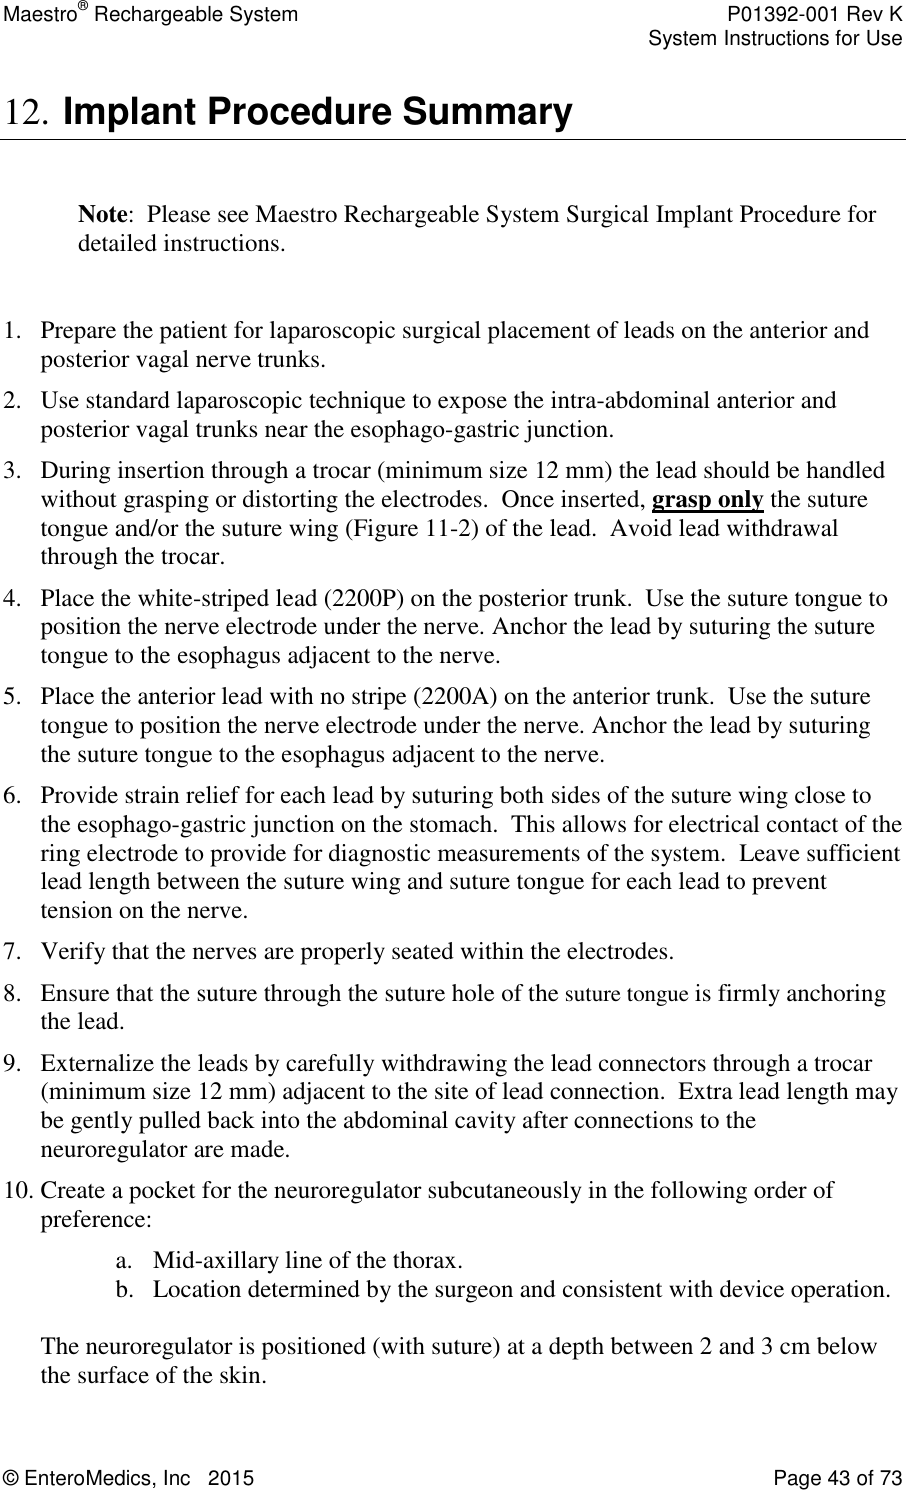 Maestro® Rechargeable System    P01392-001 Rev K     System Instructions for Use  © EnteroMedics, Inc   2015  Page 43 of 73  12. Implant Procedure Summary  Note:  Please see Maestro Rechargeable System Surgical Implant Procedure for detailed instructions.  1. Prepare the patient for laparoscopic surgical placement of leads on the anterior and posterior vagal nerve trunks. 2. Use standard laparoscopic technique to expose the intra-abdominal anterior and posterior vagal trunks near the esophago-gastric junction. 3. During insertion through a trocar (minimum size 12 mm) the lead should be handled without grasping or distorting the electrodes.  Once inserted, grasp only the suture tongue and/or the suture wing (Figure 11-2) of the lead.  Avoid lead withdrawal through the trocar. 4. Place the white-striped lead (2200P) on the posterior trunk.  Use the suture tongue to position the nerve electrode under the nerve. Anchor the lead by suturing the suture tongue to the esophagus adjacent to the nerve. 5. Place the anterior lead with no stripe (2200A) on the anterior trunk.  Use the suture tongue to position the nerve electrode under the nerve. Anchor the lead by suturing the suture tongue to the esophagus adjacent to the nerve. 6. Provide strain relief for each lead by suturing both sides of the suture wing close to the esophago-gastric junction on the stomach.  This allows for electrical contact of the ring electrode to provide for diagnostic measurements of the system.  Leave sufficient lead length between the suture wing and suture tongue for each lead to prevent tension on the nerve. 7. Verify that the nerves are properly seated within the electrodes.  8. Ensure that the suture through the suture hole of the suture tongue is firmly anchoring the lead.   9. Externalize the leads by carefully withdrawing the lead connectors through a trocar (minimum size 12 mm) adjacent to the site of lead connection.  Extra lead length may be gently pulled back into the abdominal cavity after connections to the neuroregulator are made. 10. Create a pocket for the neuroregulator subcutaneously in the following order of preference:  a. Mid-axillary line of the thorax.  b. Location determined by the surgeon and consistent with device operation.    The neuroregulator is positioned (with suture) at a depth between 2 and 3 cm below the surface of the skin.   